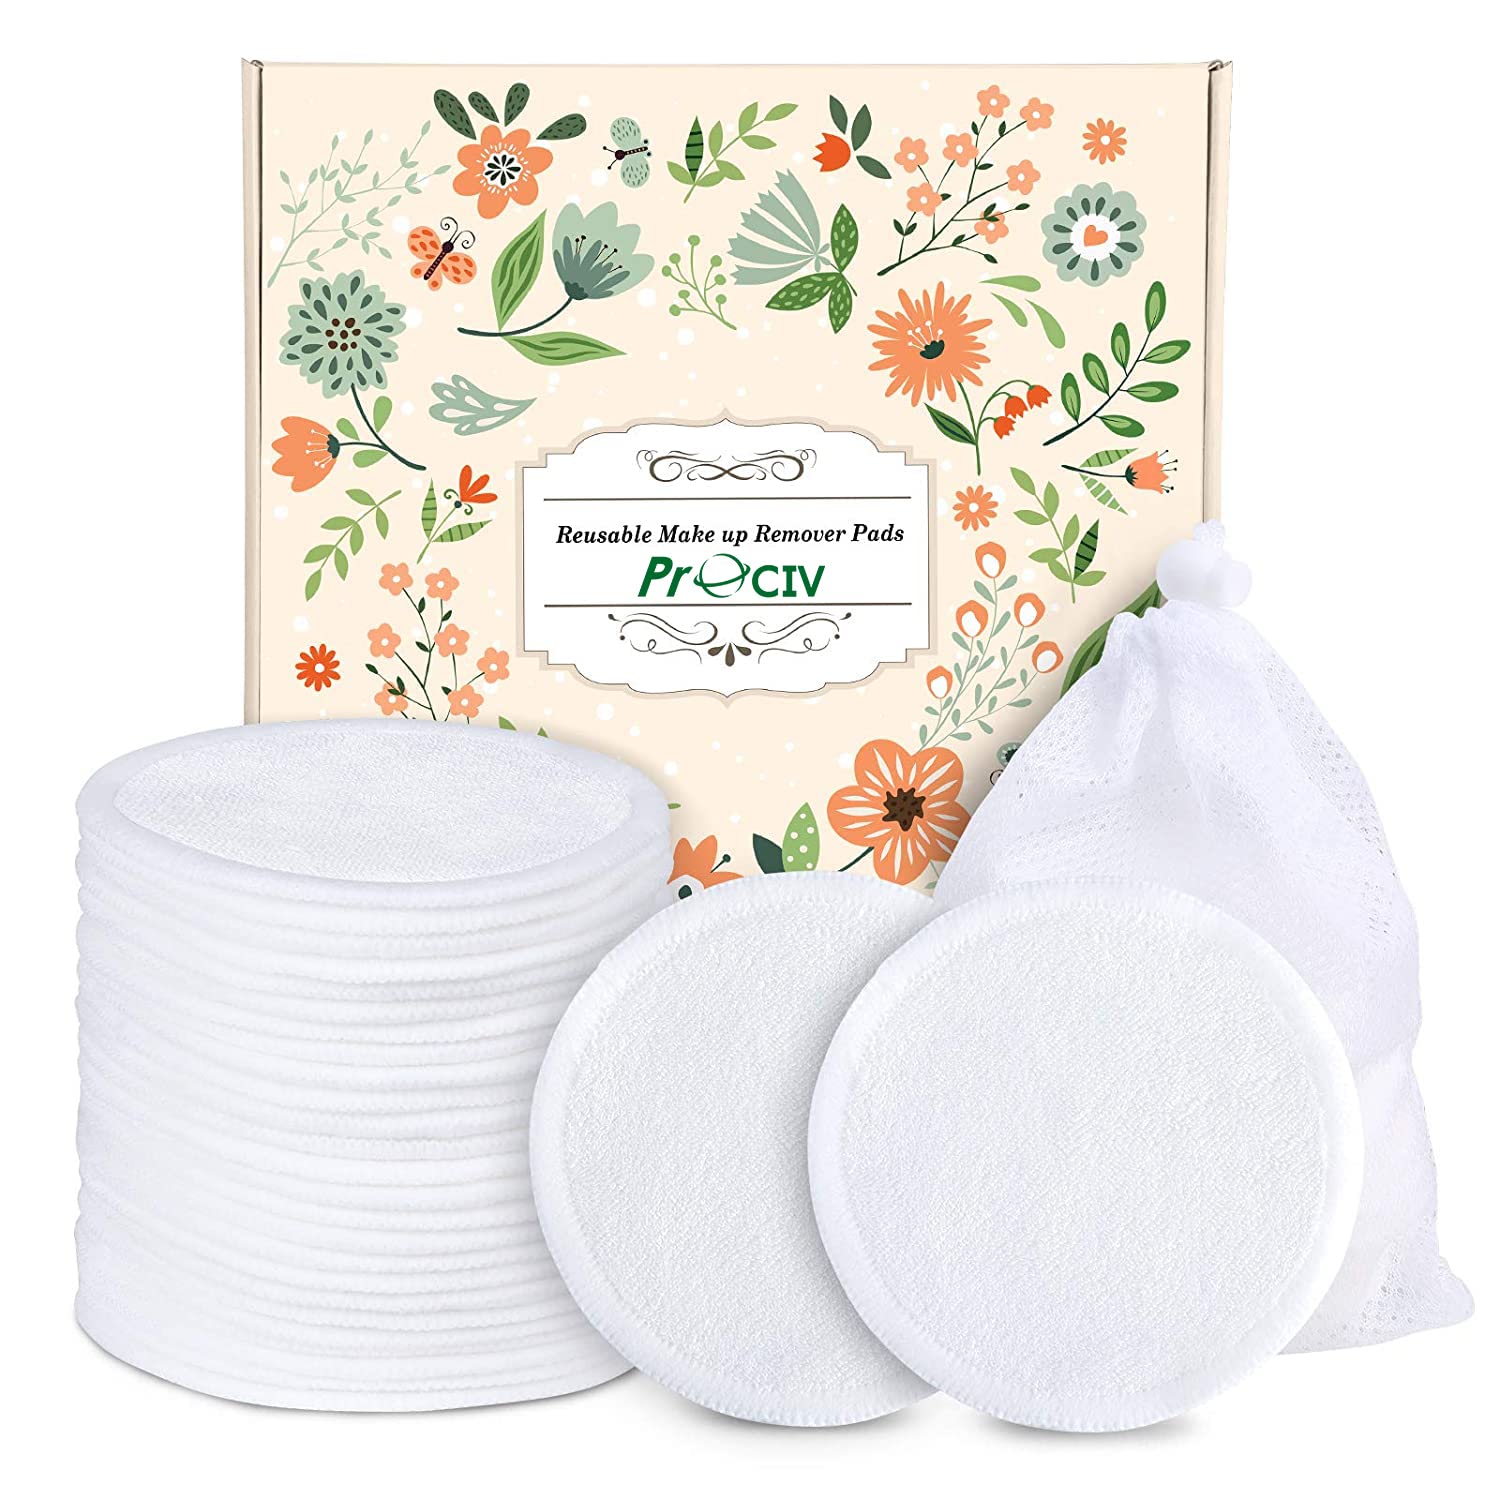 ProCIV Reusable Makeup Remover Pads, 16 Packs Washable Organic Reusable Cotton Rounds for All Skin Types & Toner with Laundry Bag, Zero Waste Reusable Cotton Pads for Face for Woman Gift (White)